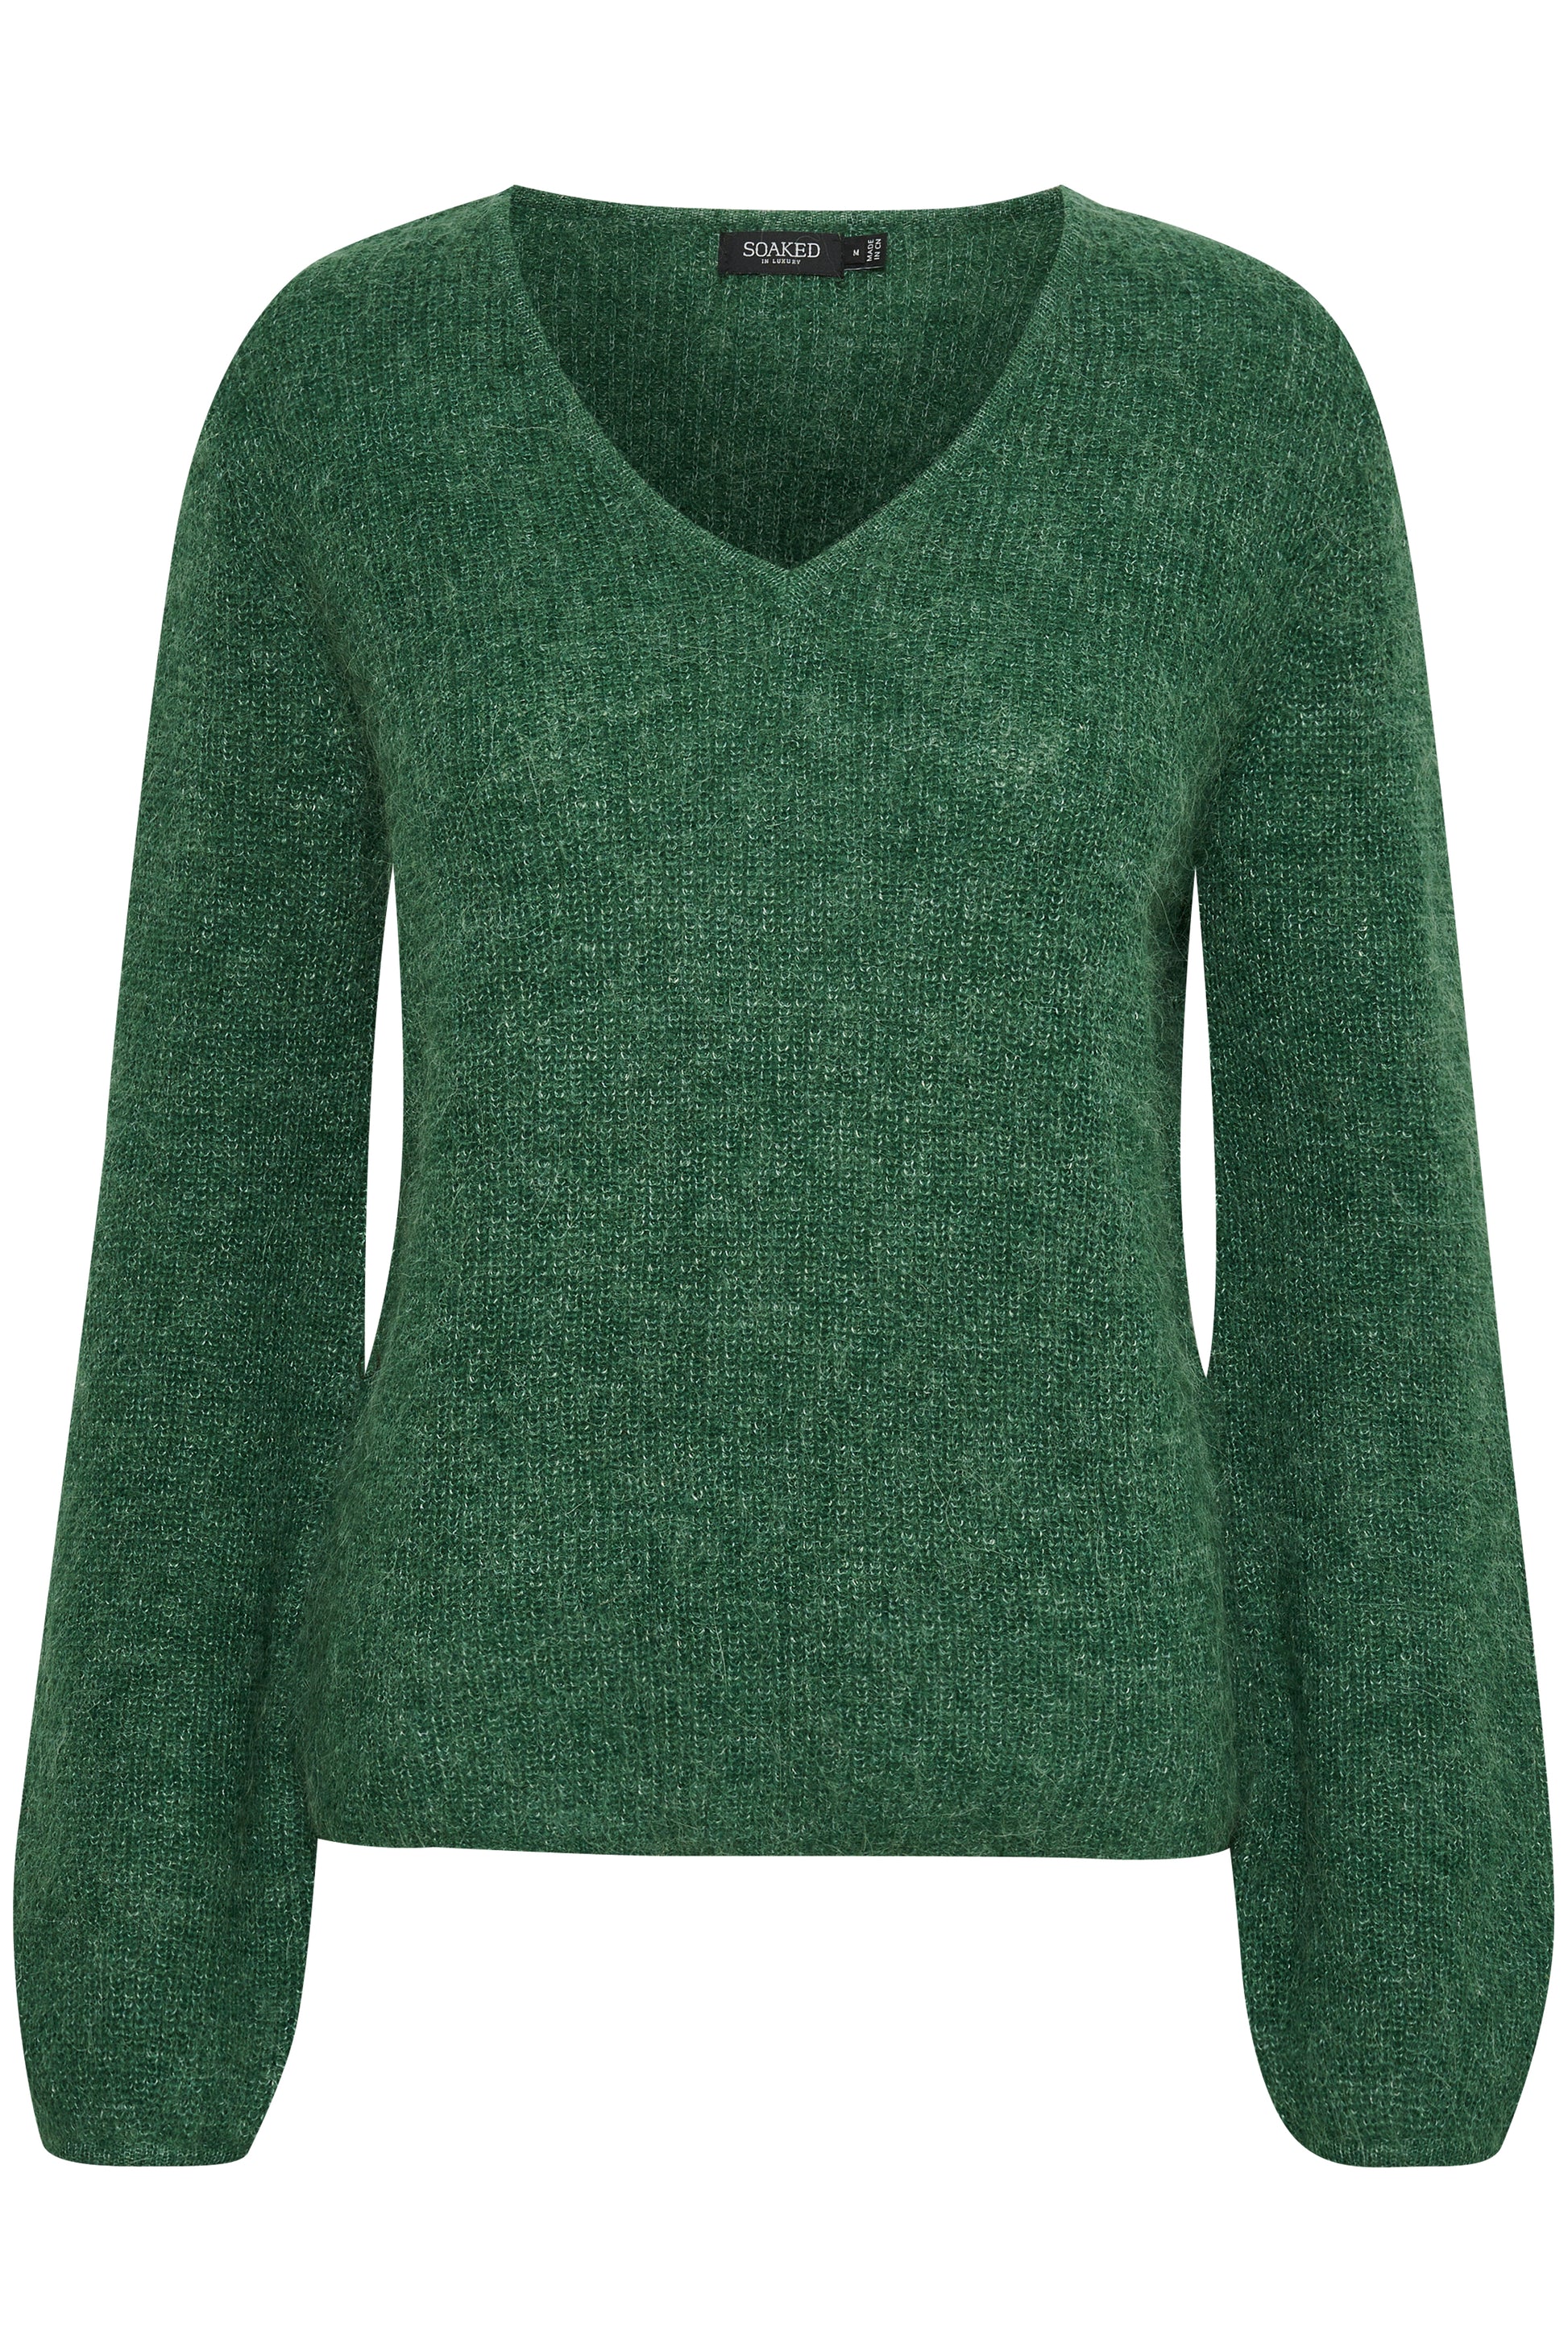 Soaked in Luxury Tuesday V-Neck Jumper LS Knit Foliage Green